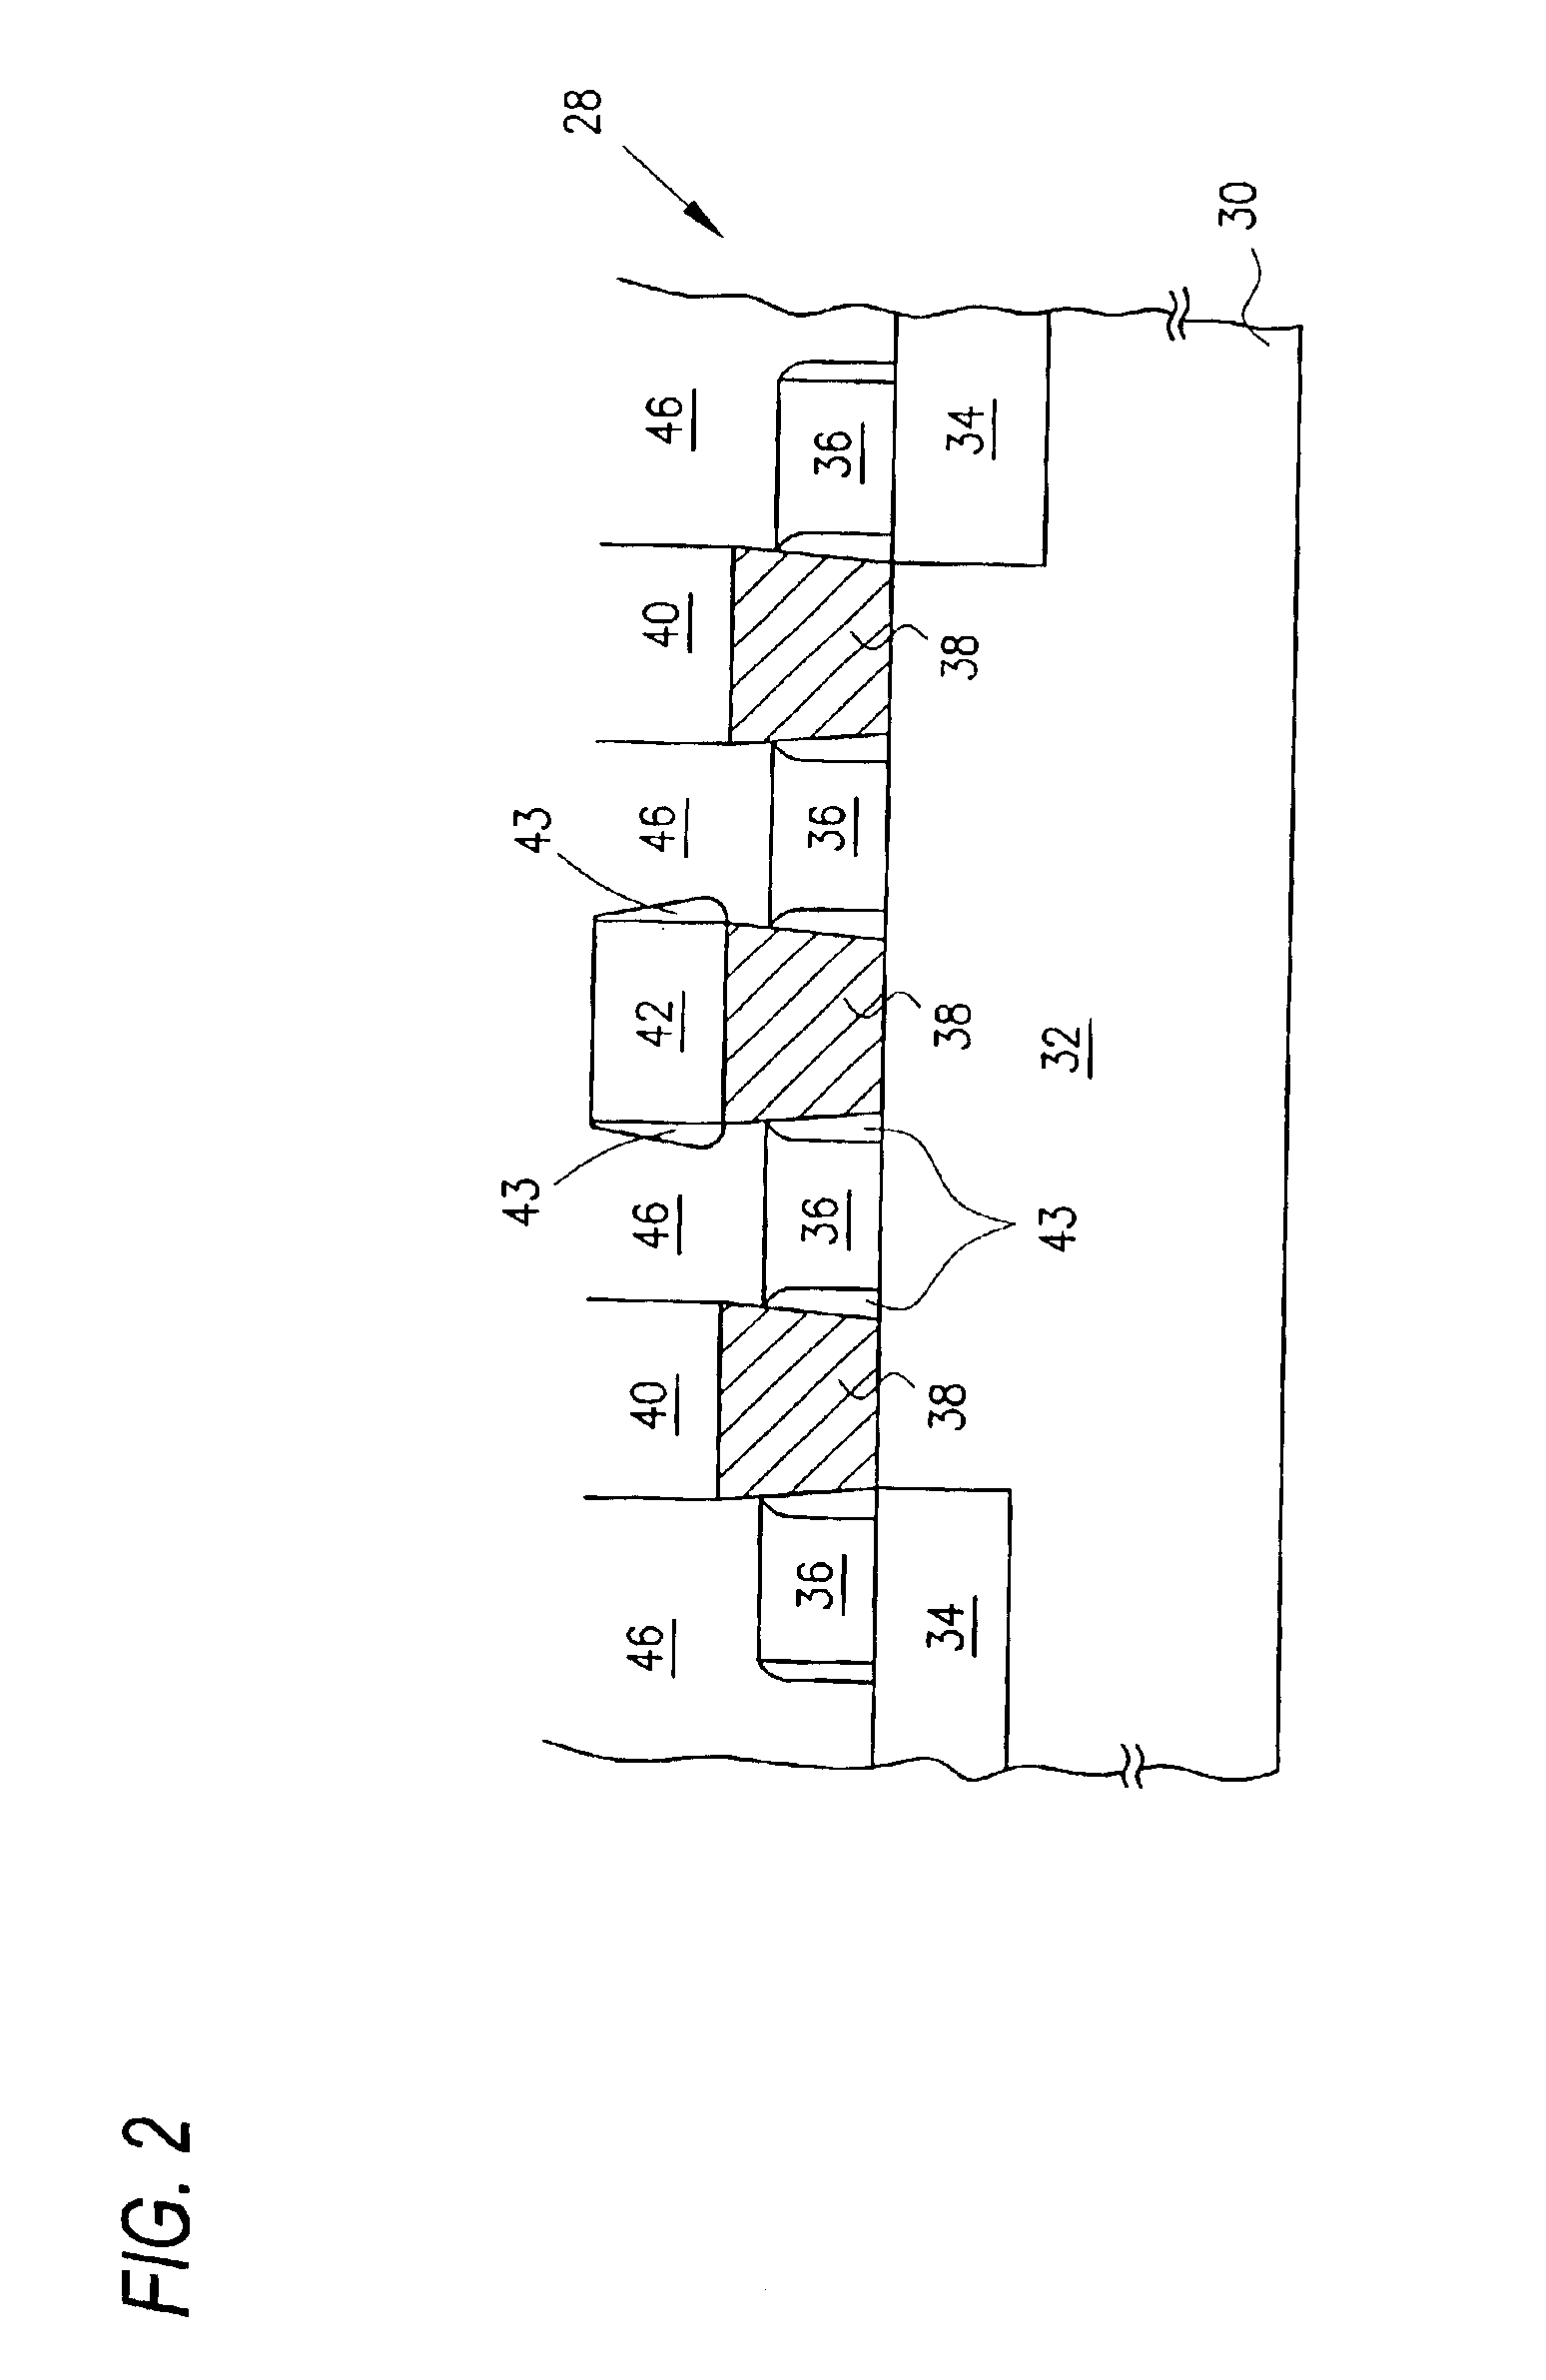 Fabrication of semiconductor devices with transition metal boride films as diffusion barriers